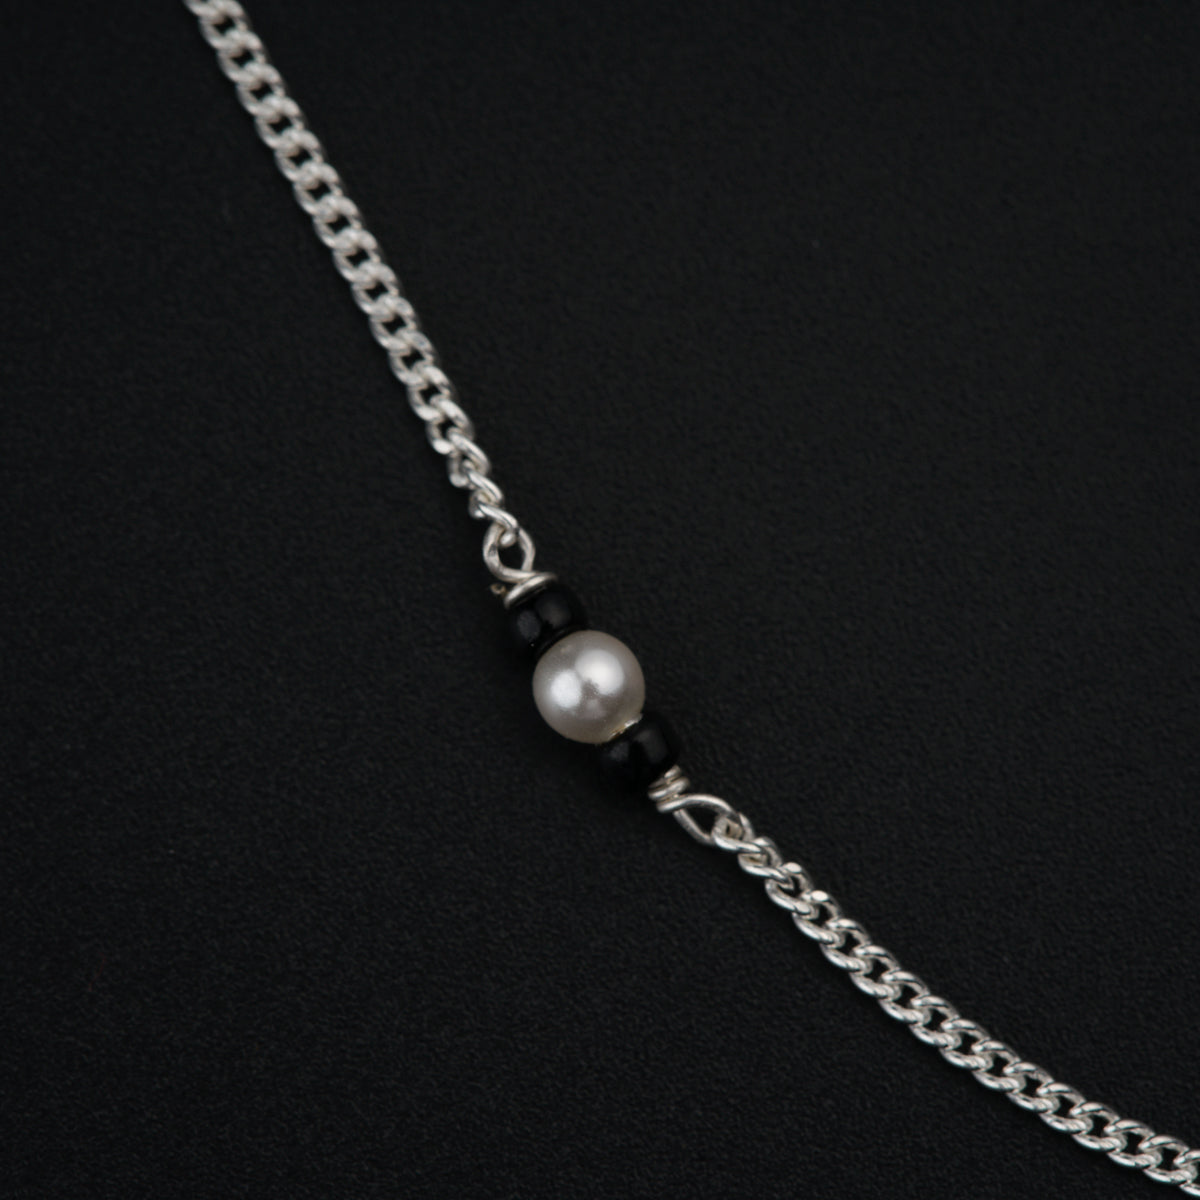 a black and white necklace with a pearl on it